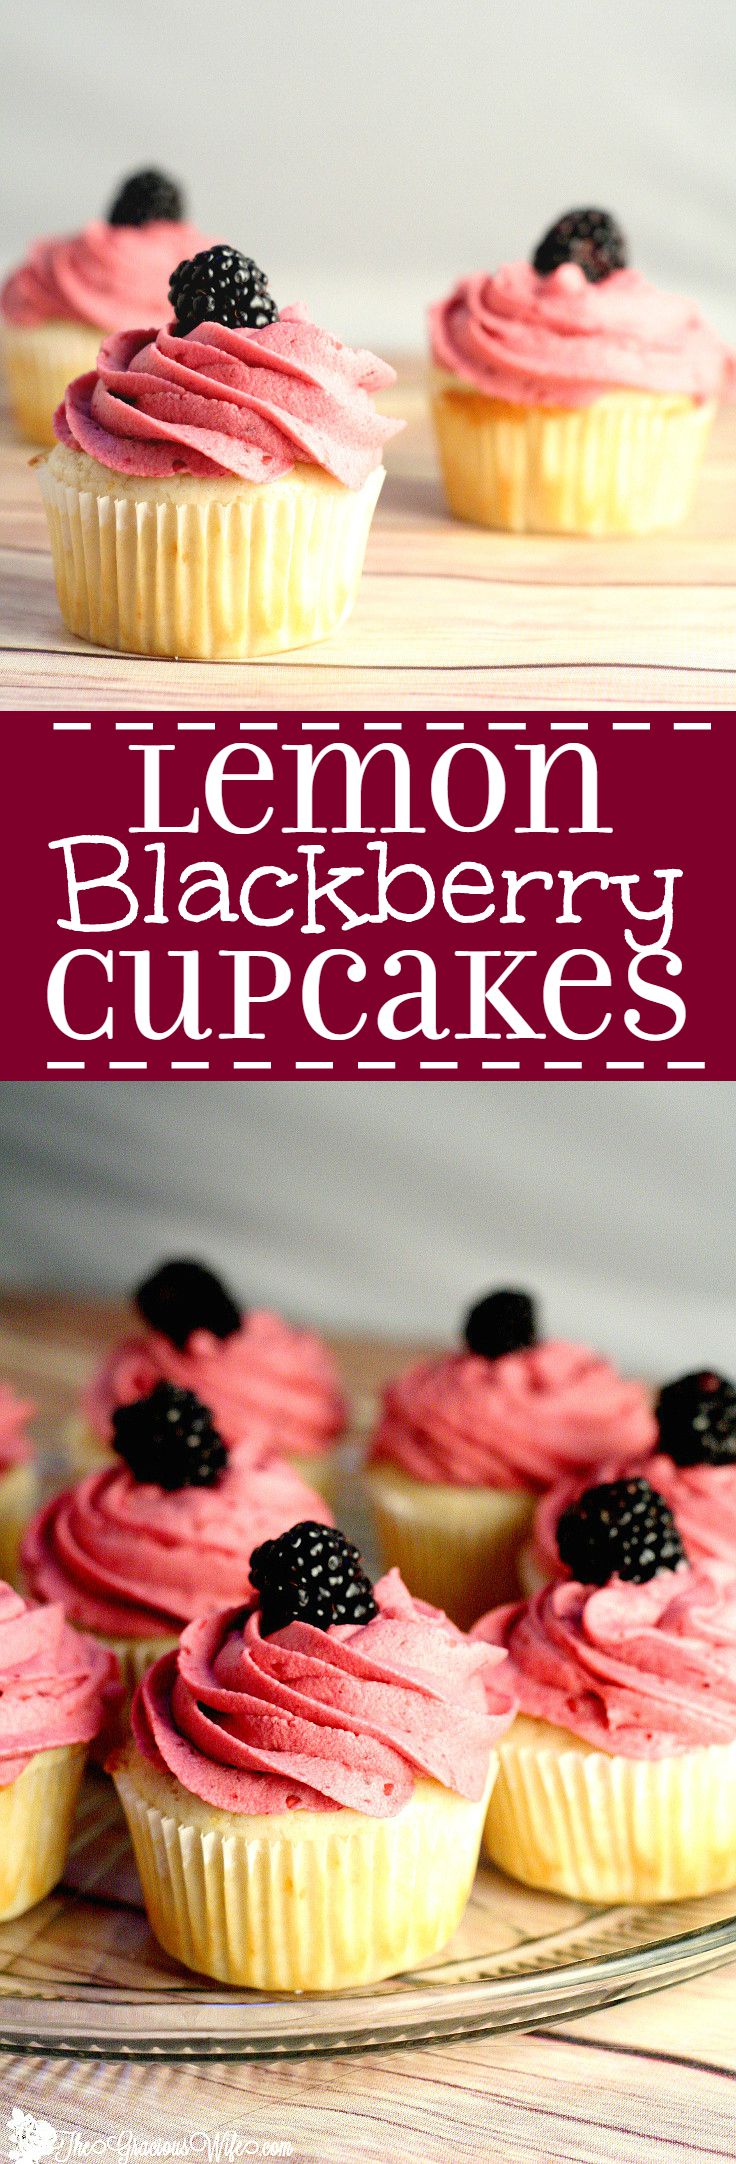 Lemon Blackberry Cupcakes Recipe - This lemon cupcakes recipe is delicious and refreshing. Would be so pretty for a party or shower! These are absolutely fabulous